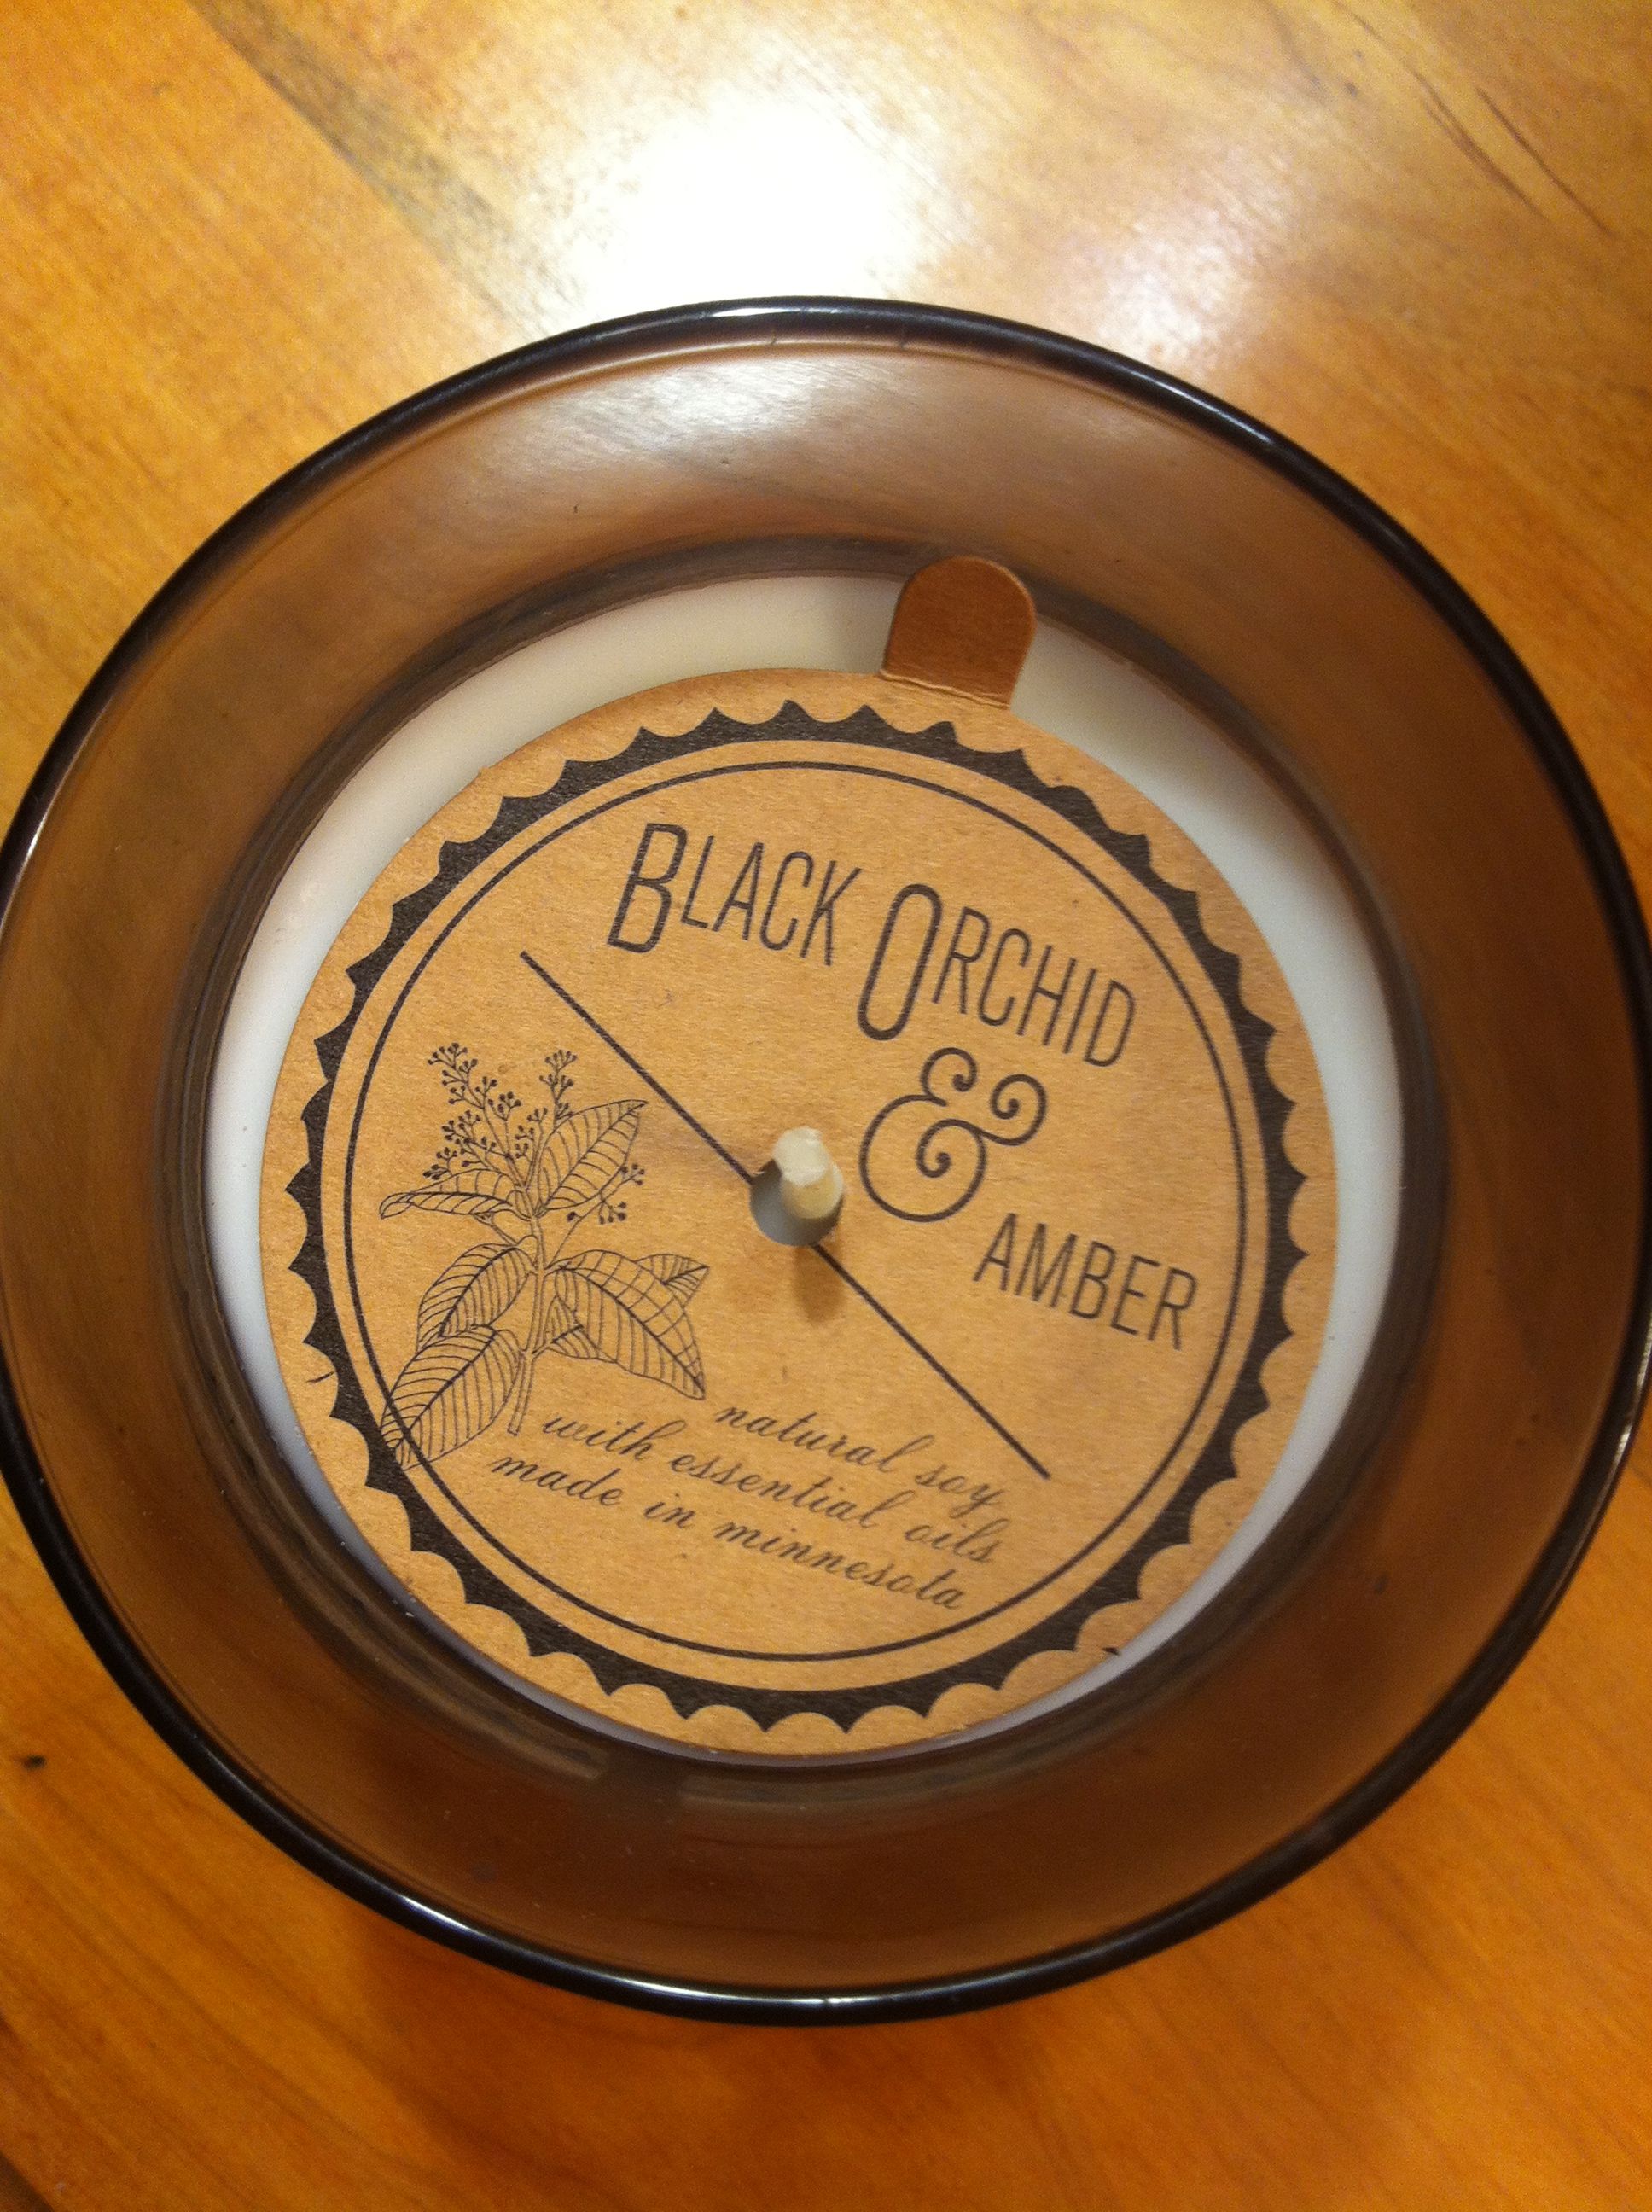 black orchid amber candle saw these target and was drawn waldo accent table the label design hooked smell need stock ikea closet organizer standing mirror tier glass side house